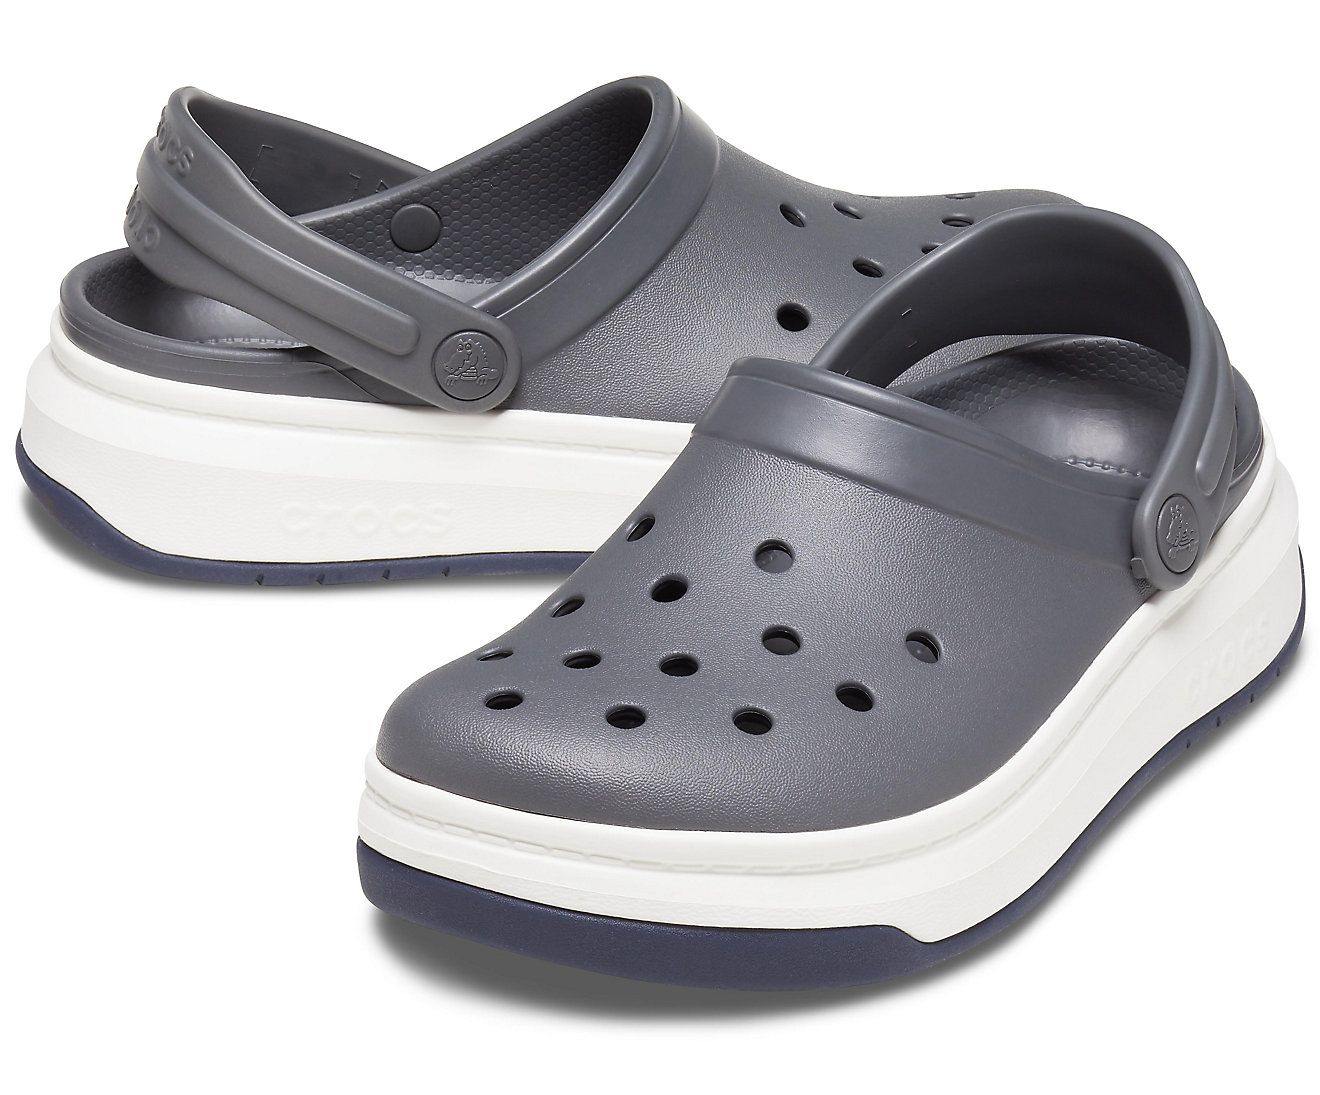 Authentic Crocband Full Force Clog - Grey/ White | mStore | mTravel ...